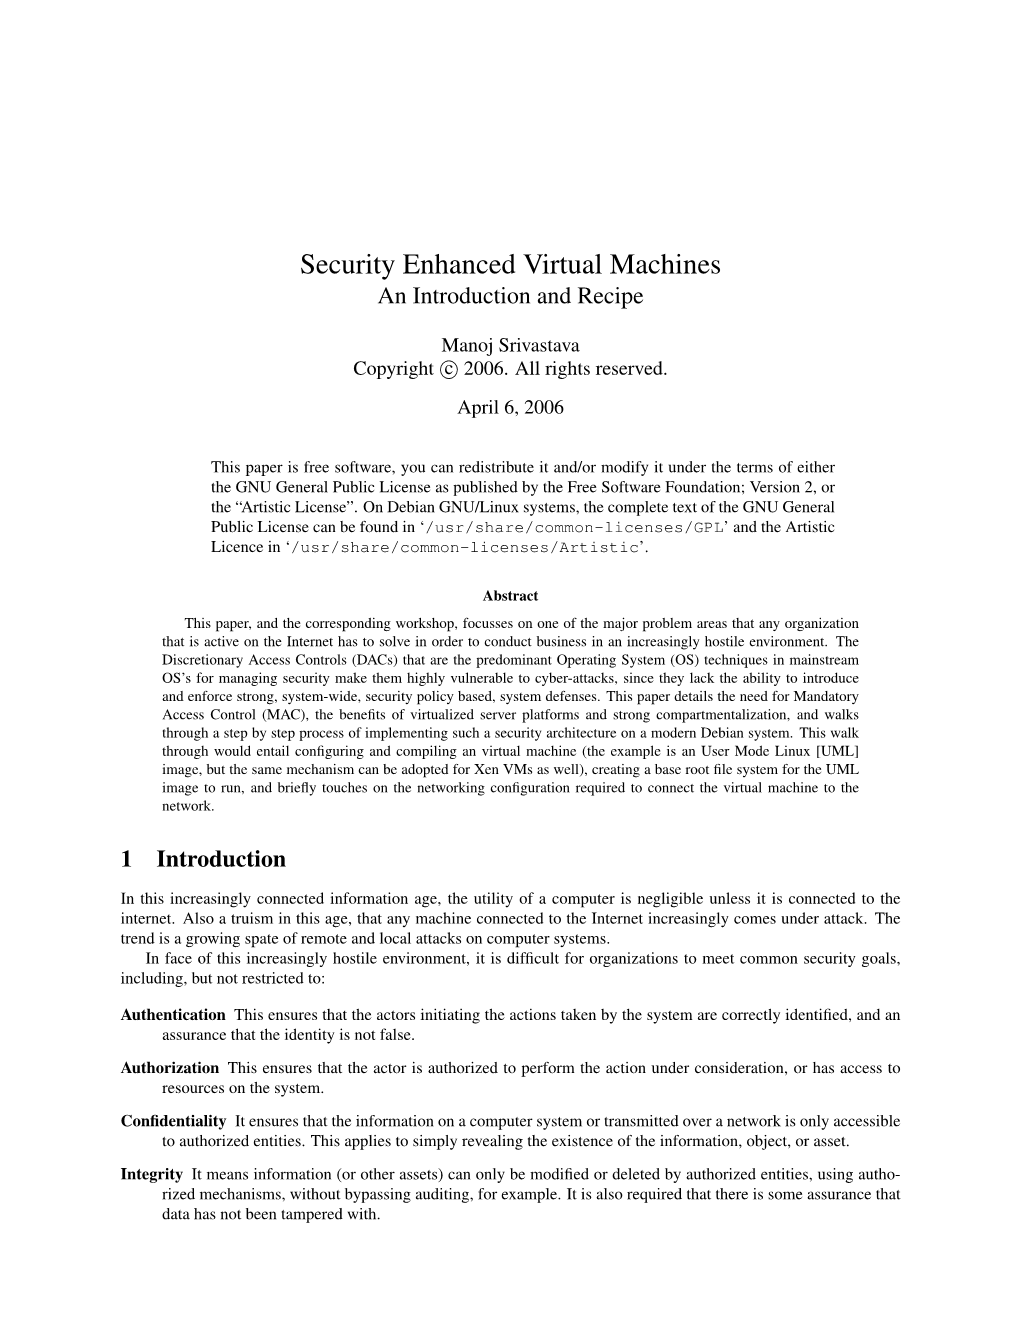 Security Enhanced Virtual Machines an Introduction and Recipe